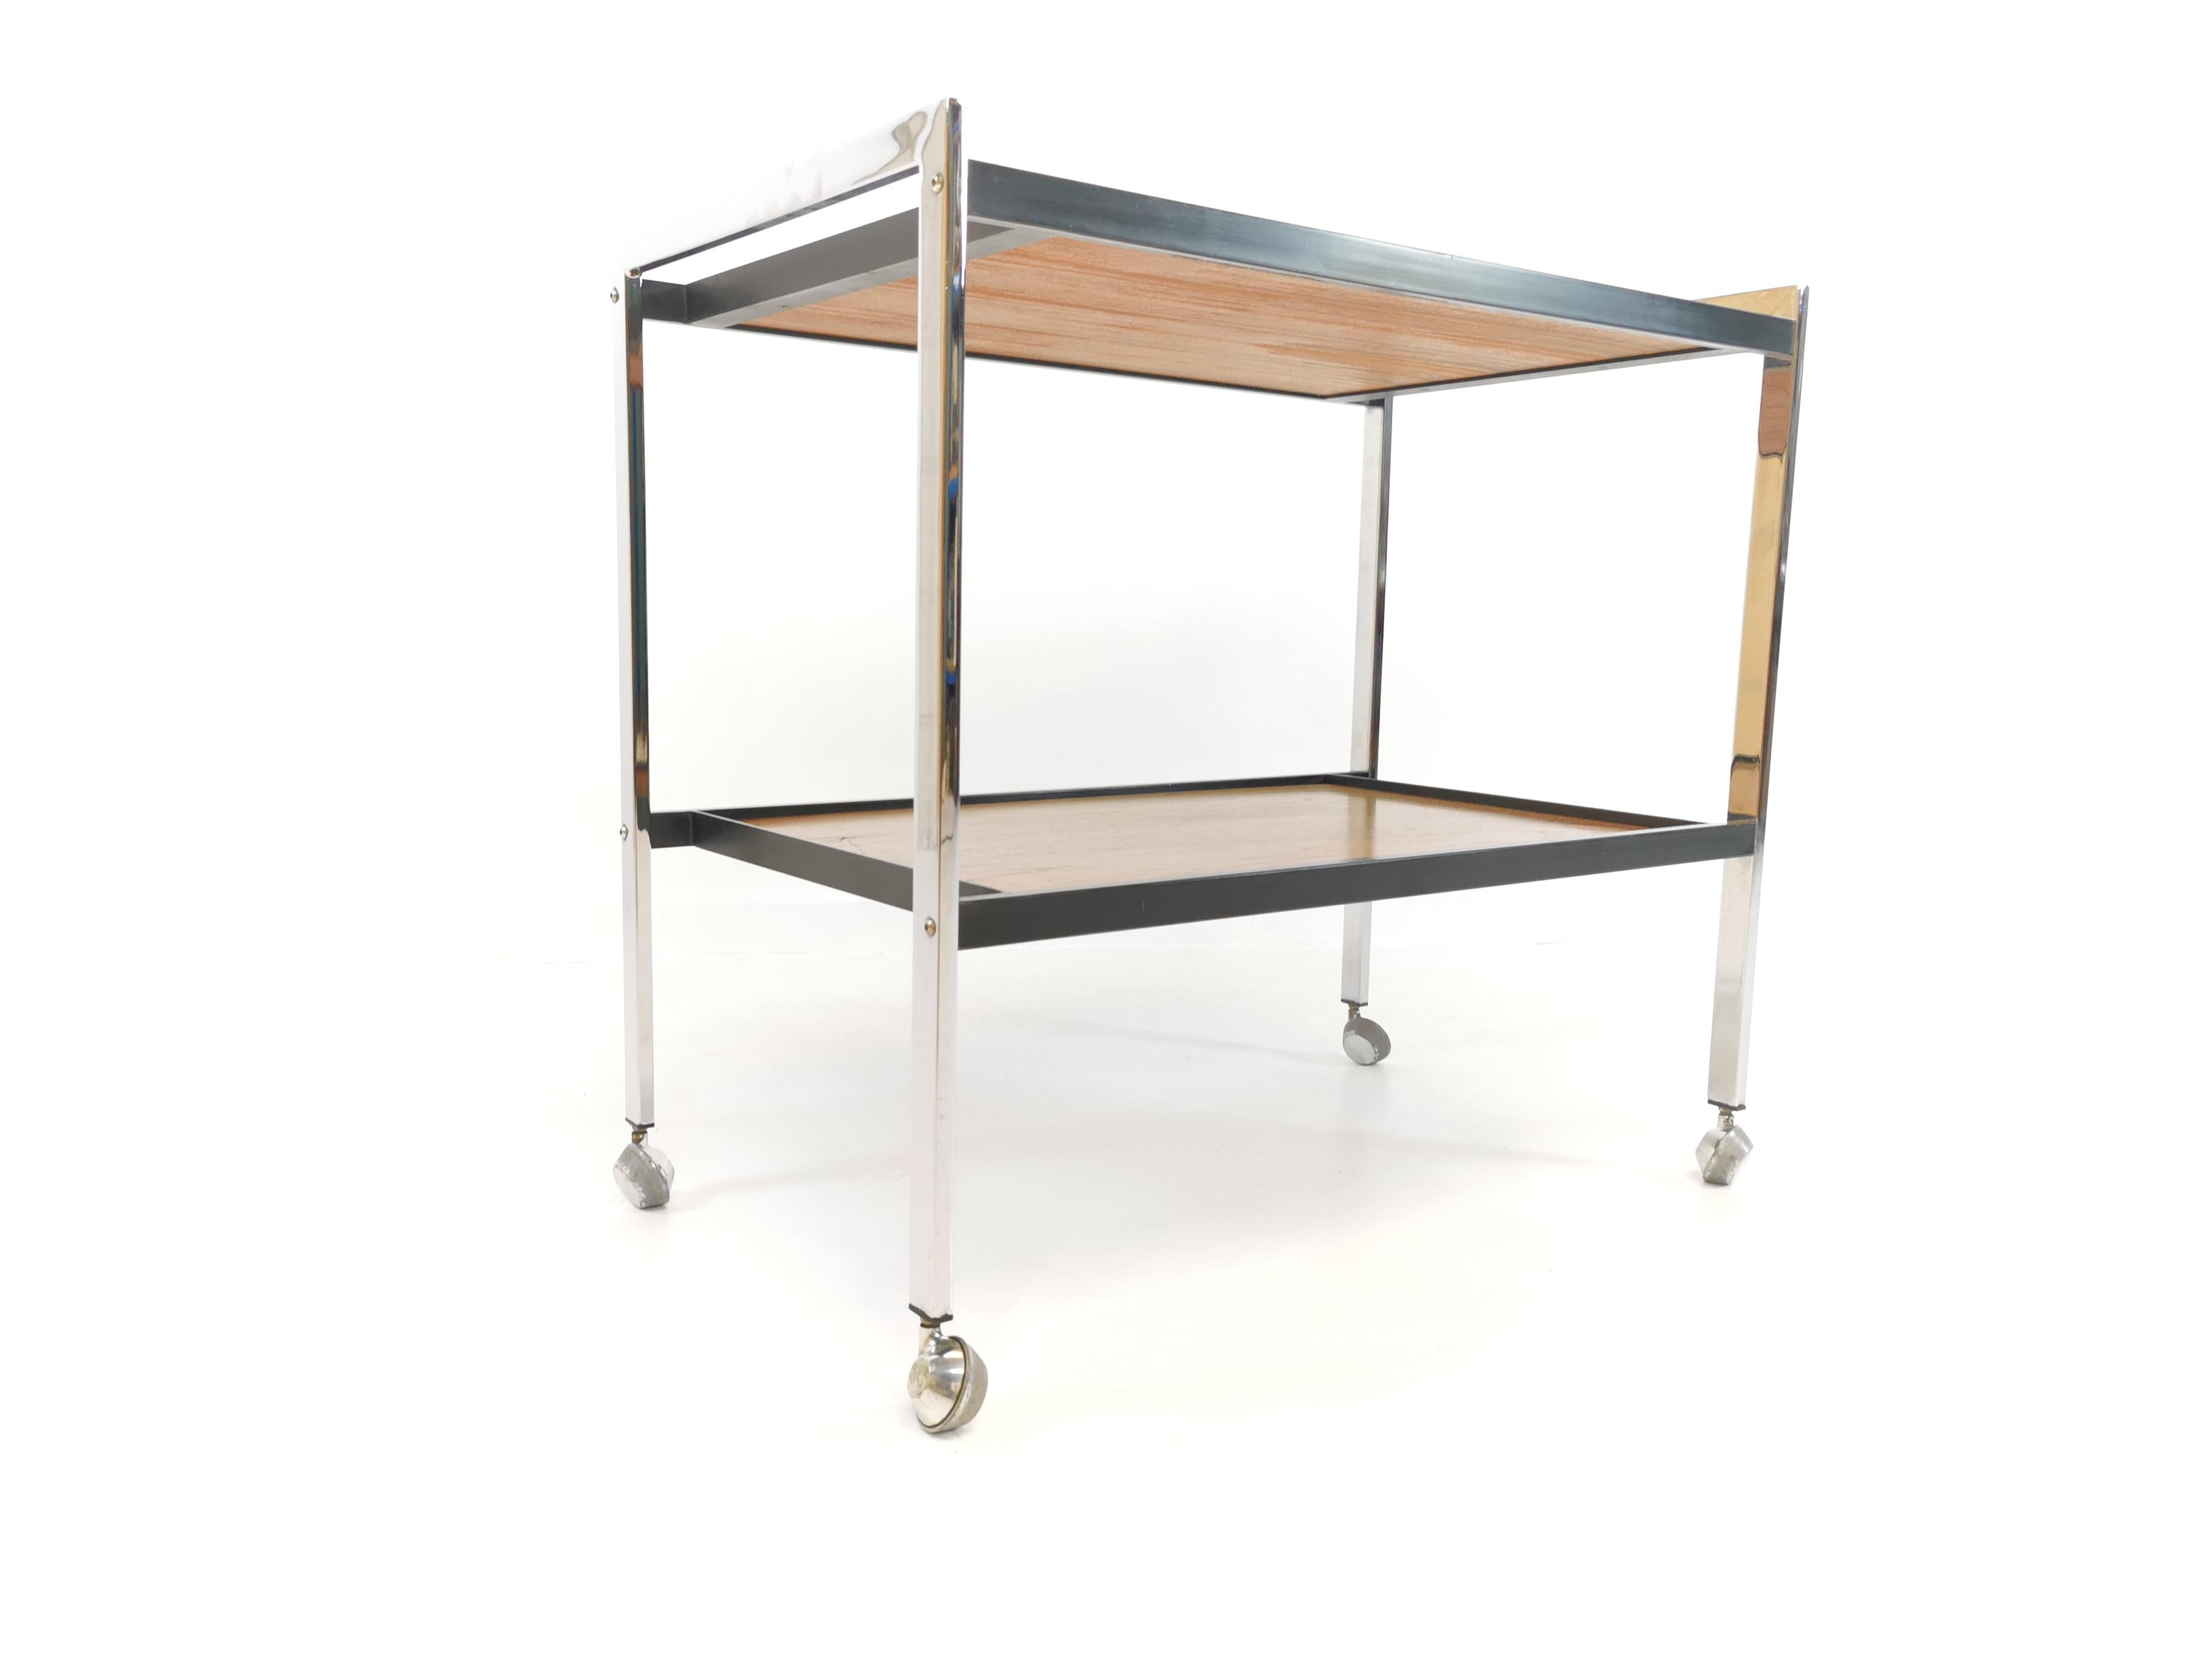 Mid-Century Modern 1970s Chrome and Teak Coffee Table Drinks Trolley by Howard Miller